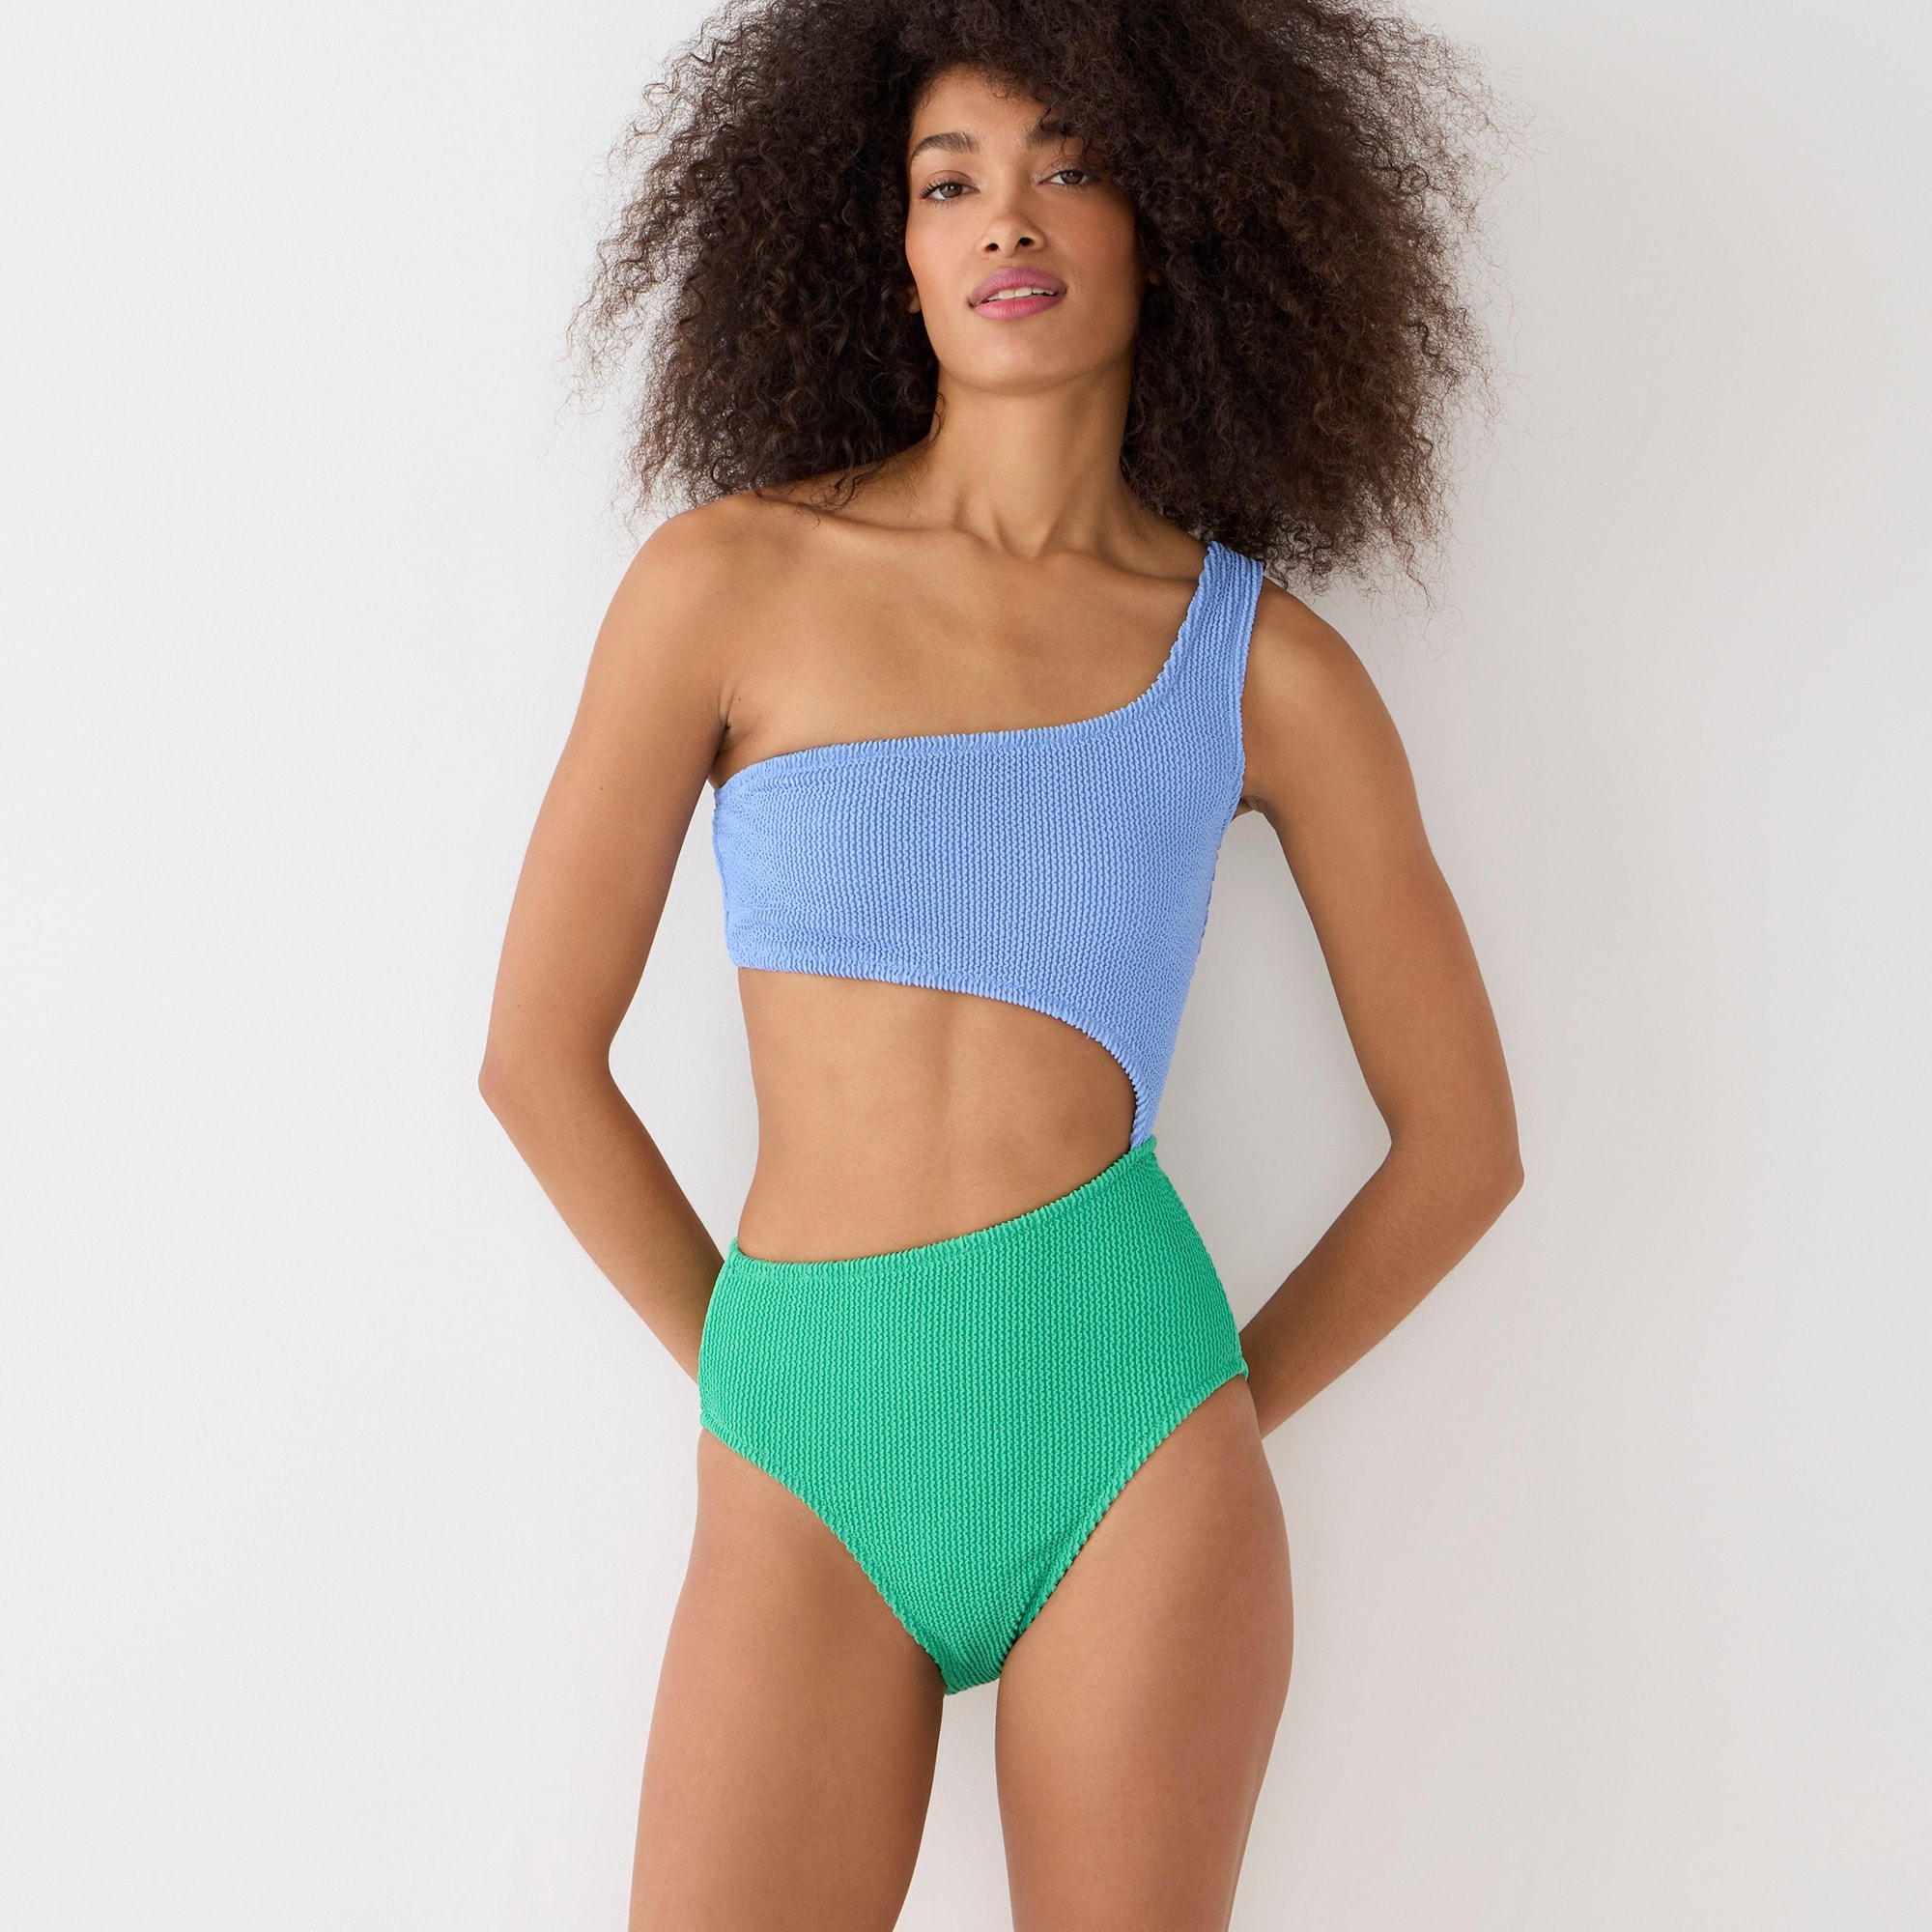 Jcrew Textured one-piece swimsuit with cutouts